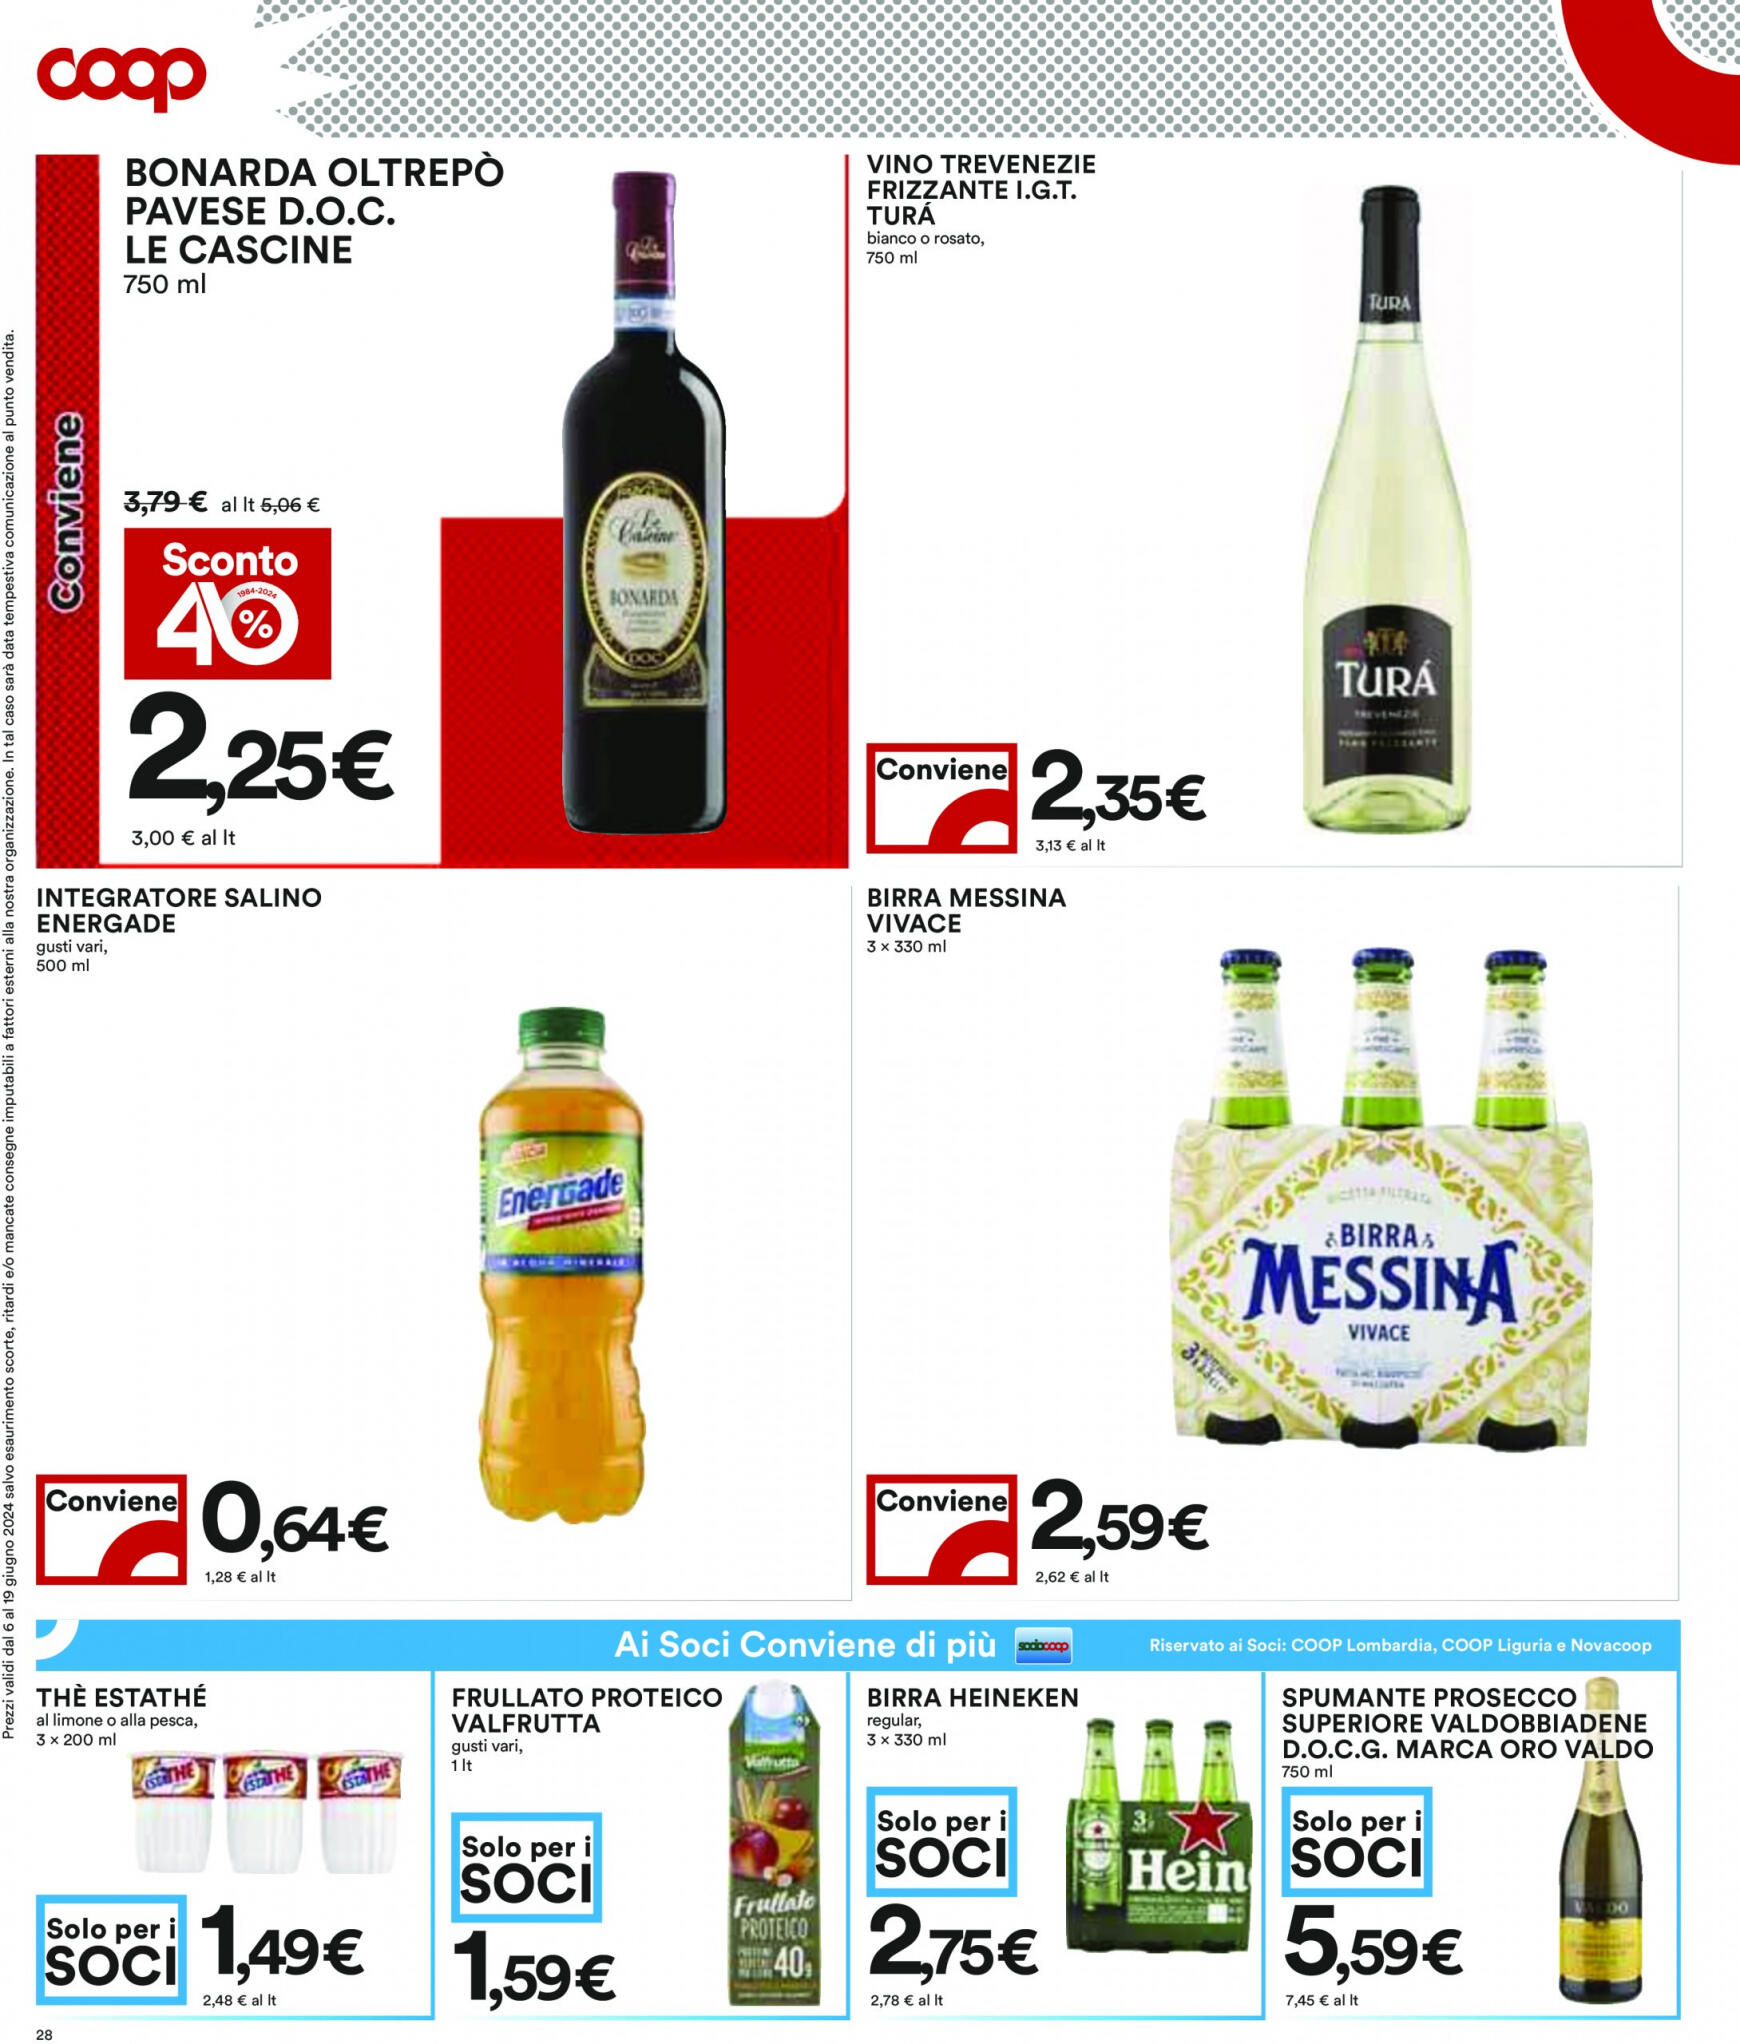 coop - Nuovo volantino Coop 10.06. - 19.06. - page: 28